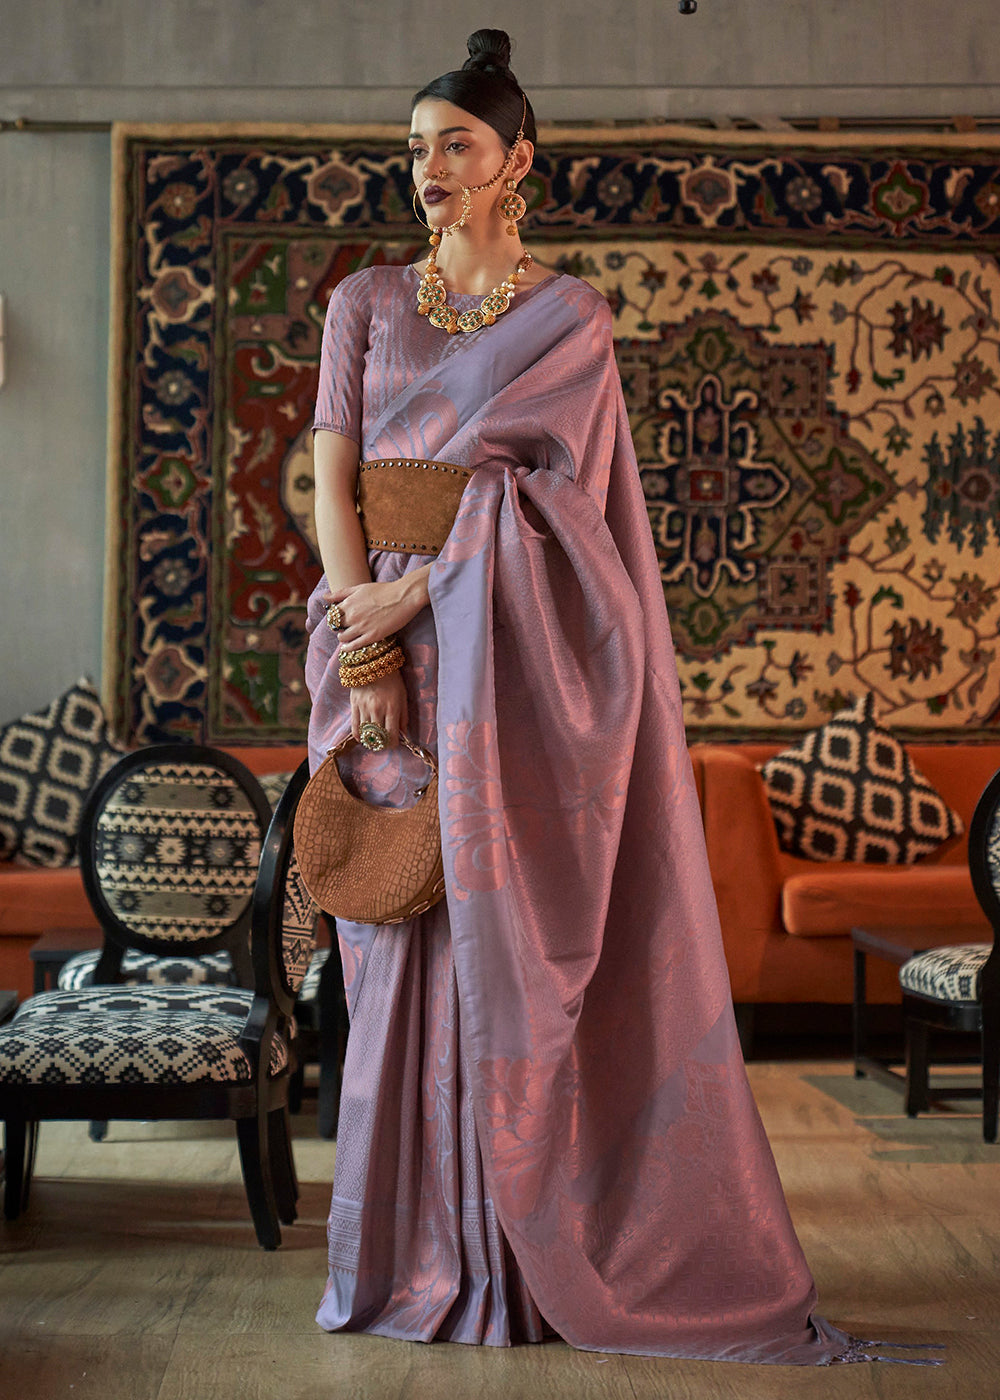 Buy Now Greyish Lilac Blended Woven Zari Brocade Silk Saree Online in USA, UK, Canada & Worldwide at Empress Clothing.